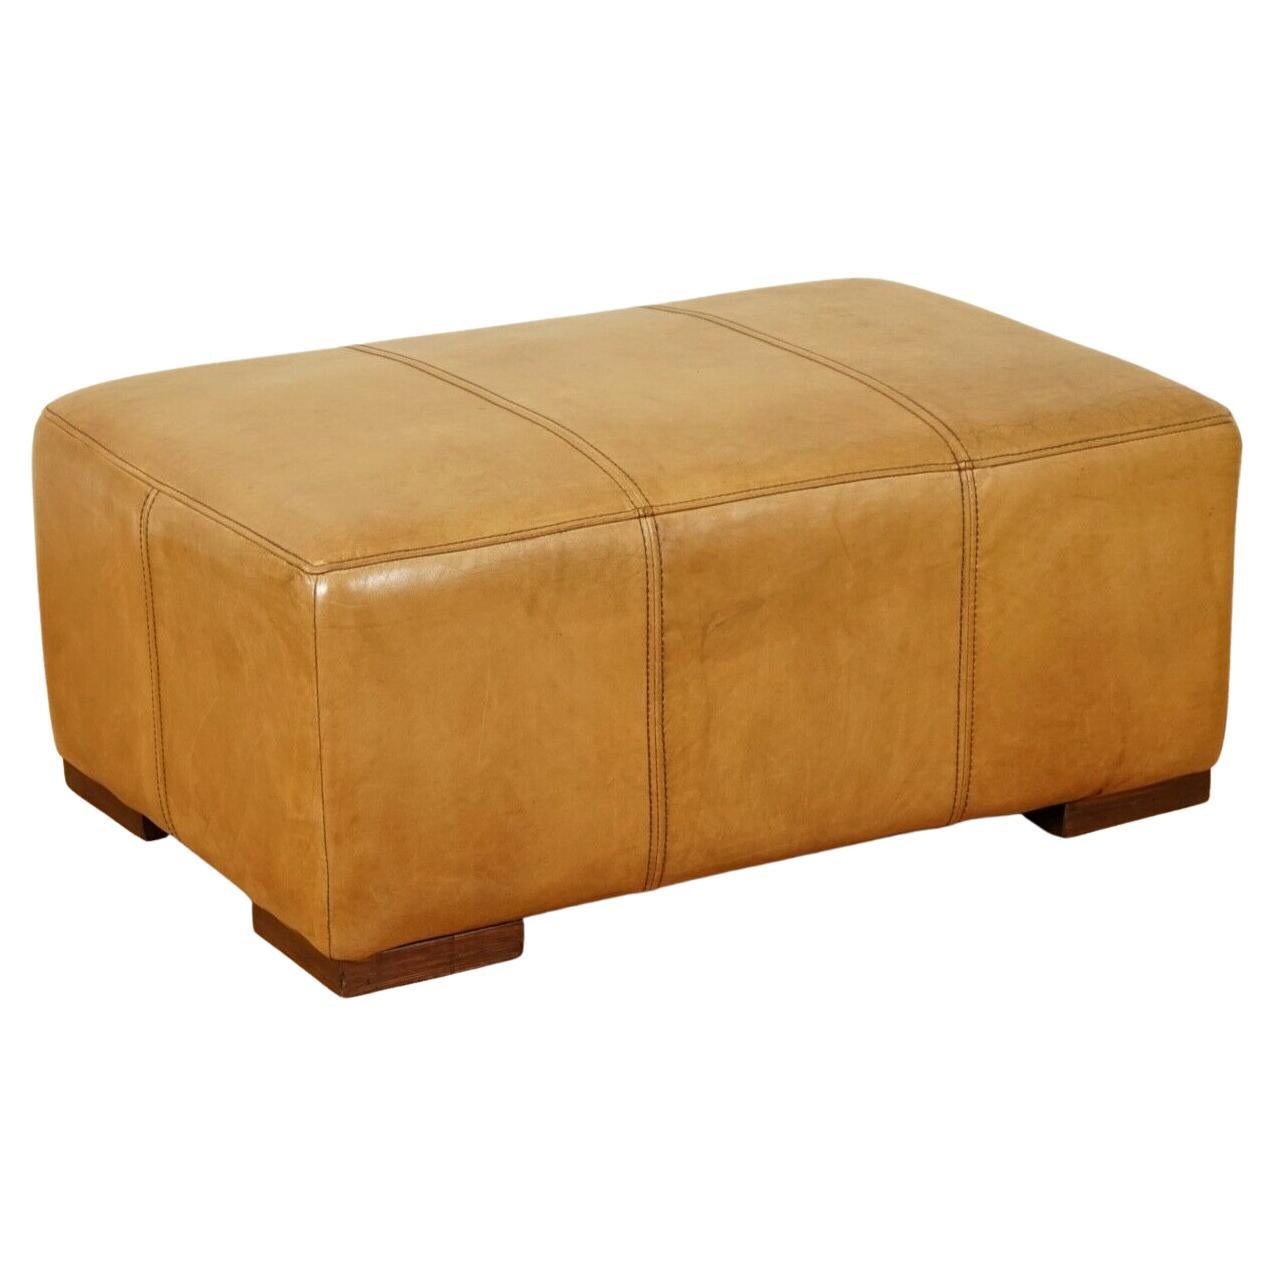 Large Vintage Tan Leather Footstool Ottoman by Halo